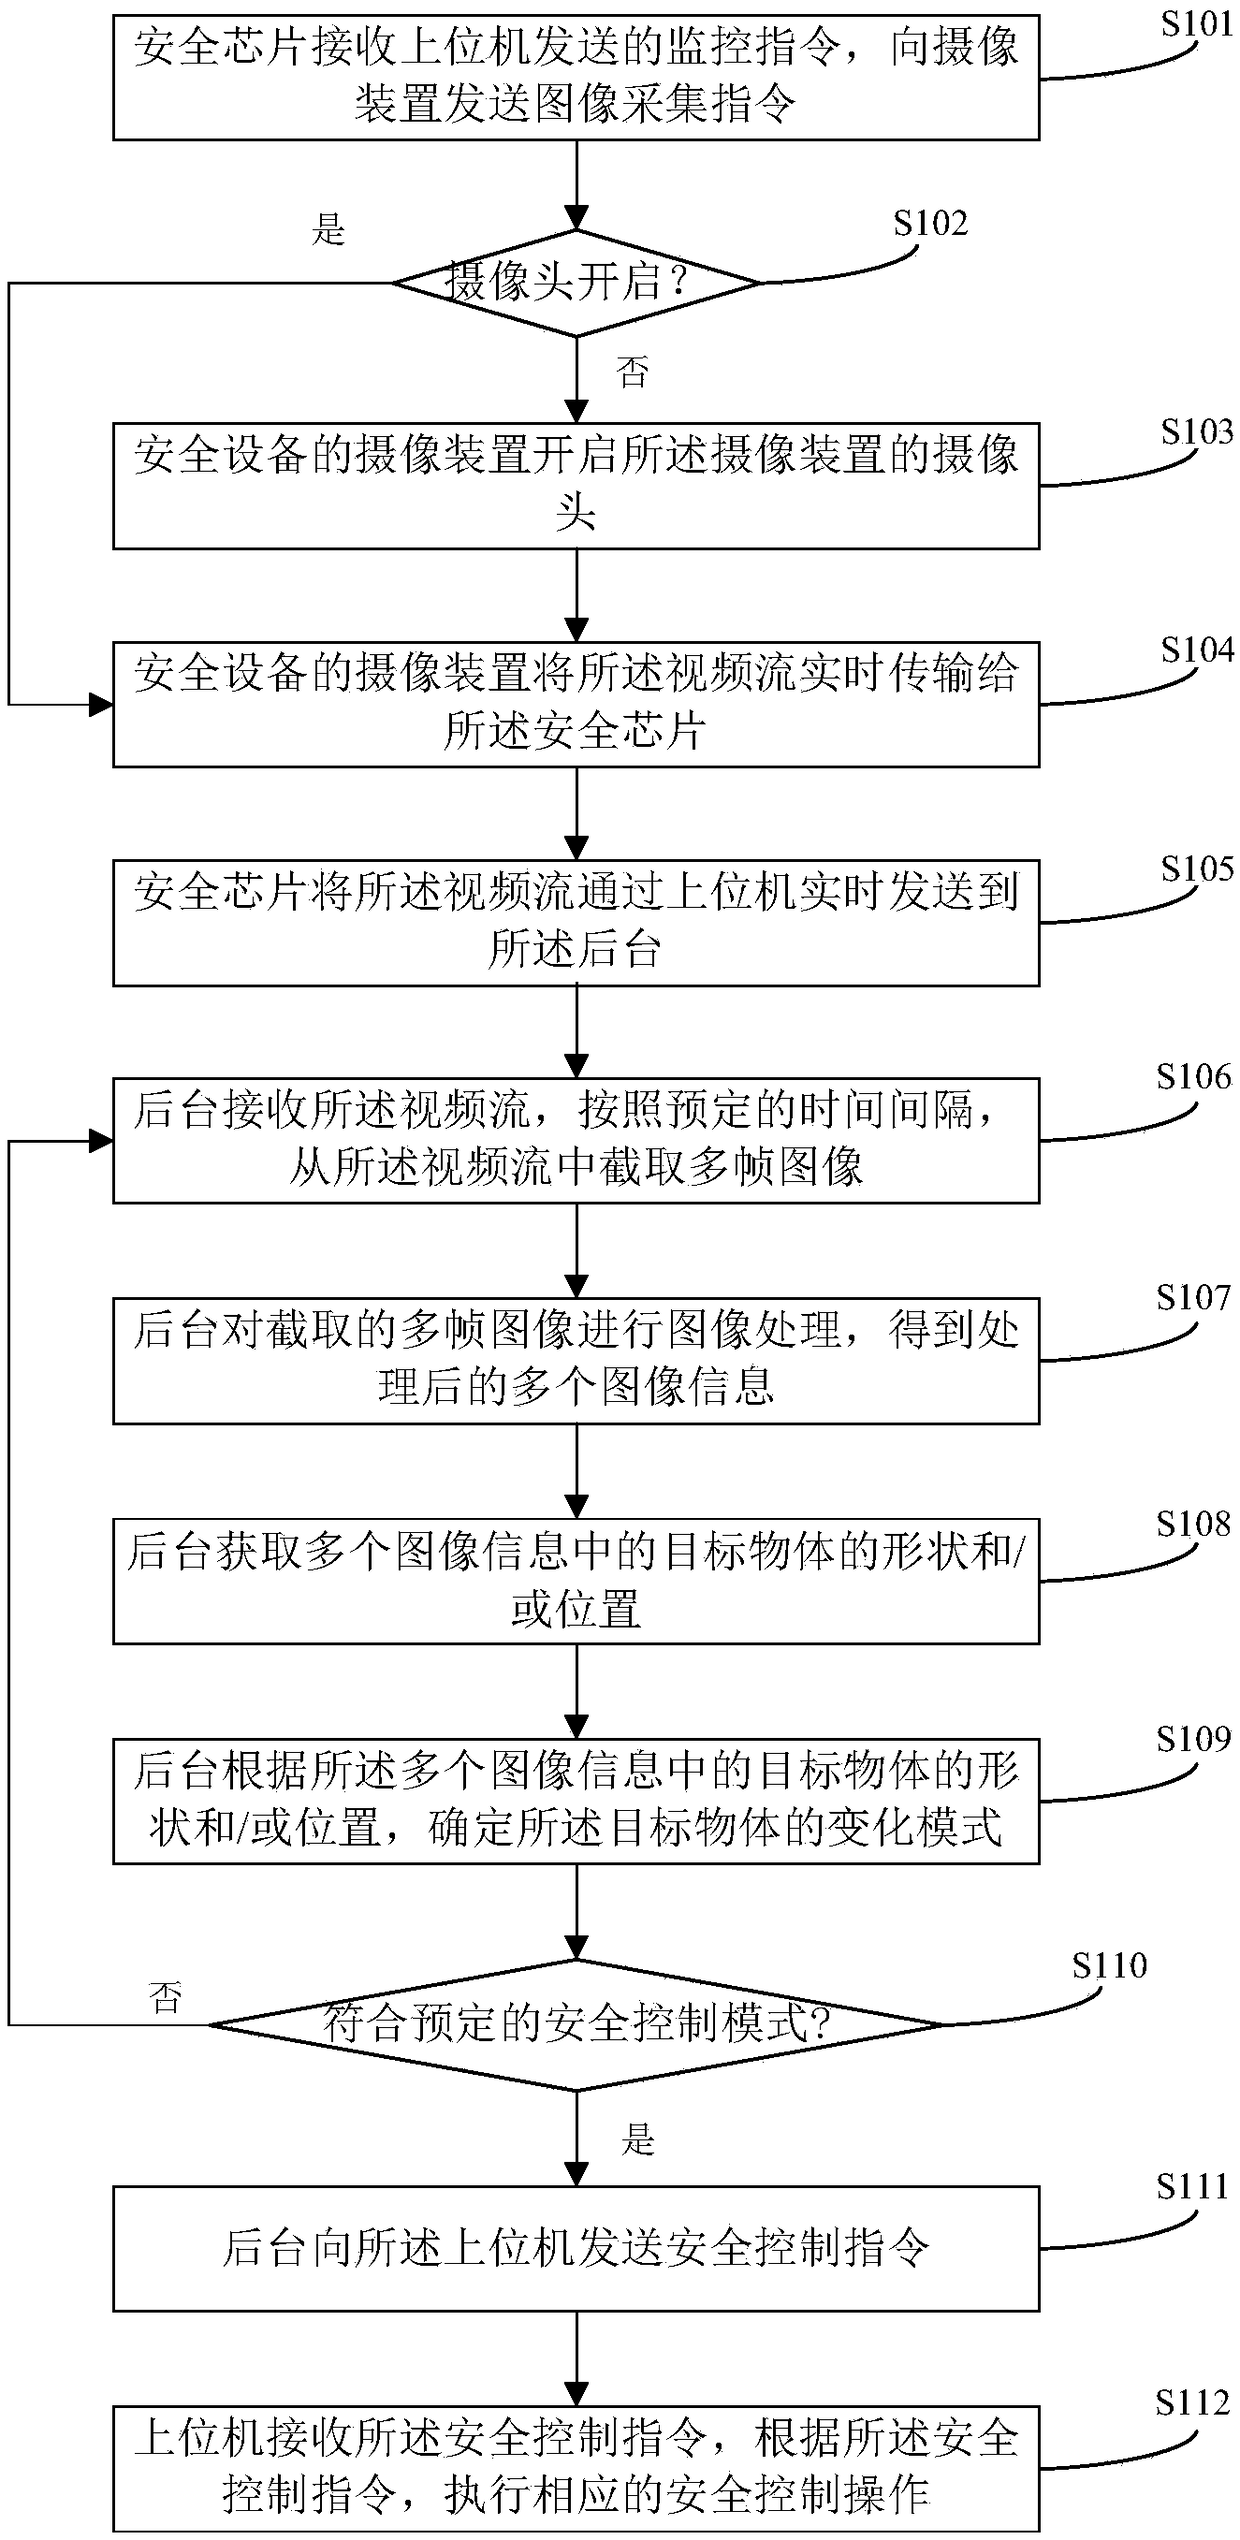 Method and system for performing security control using security device